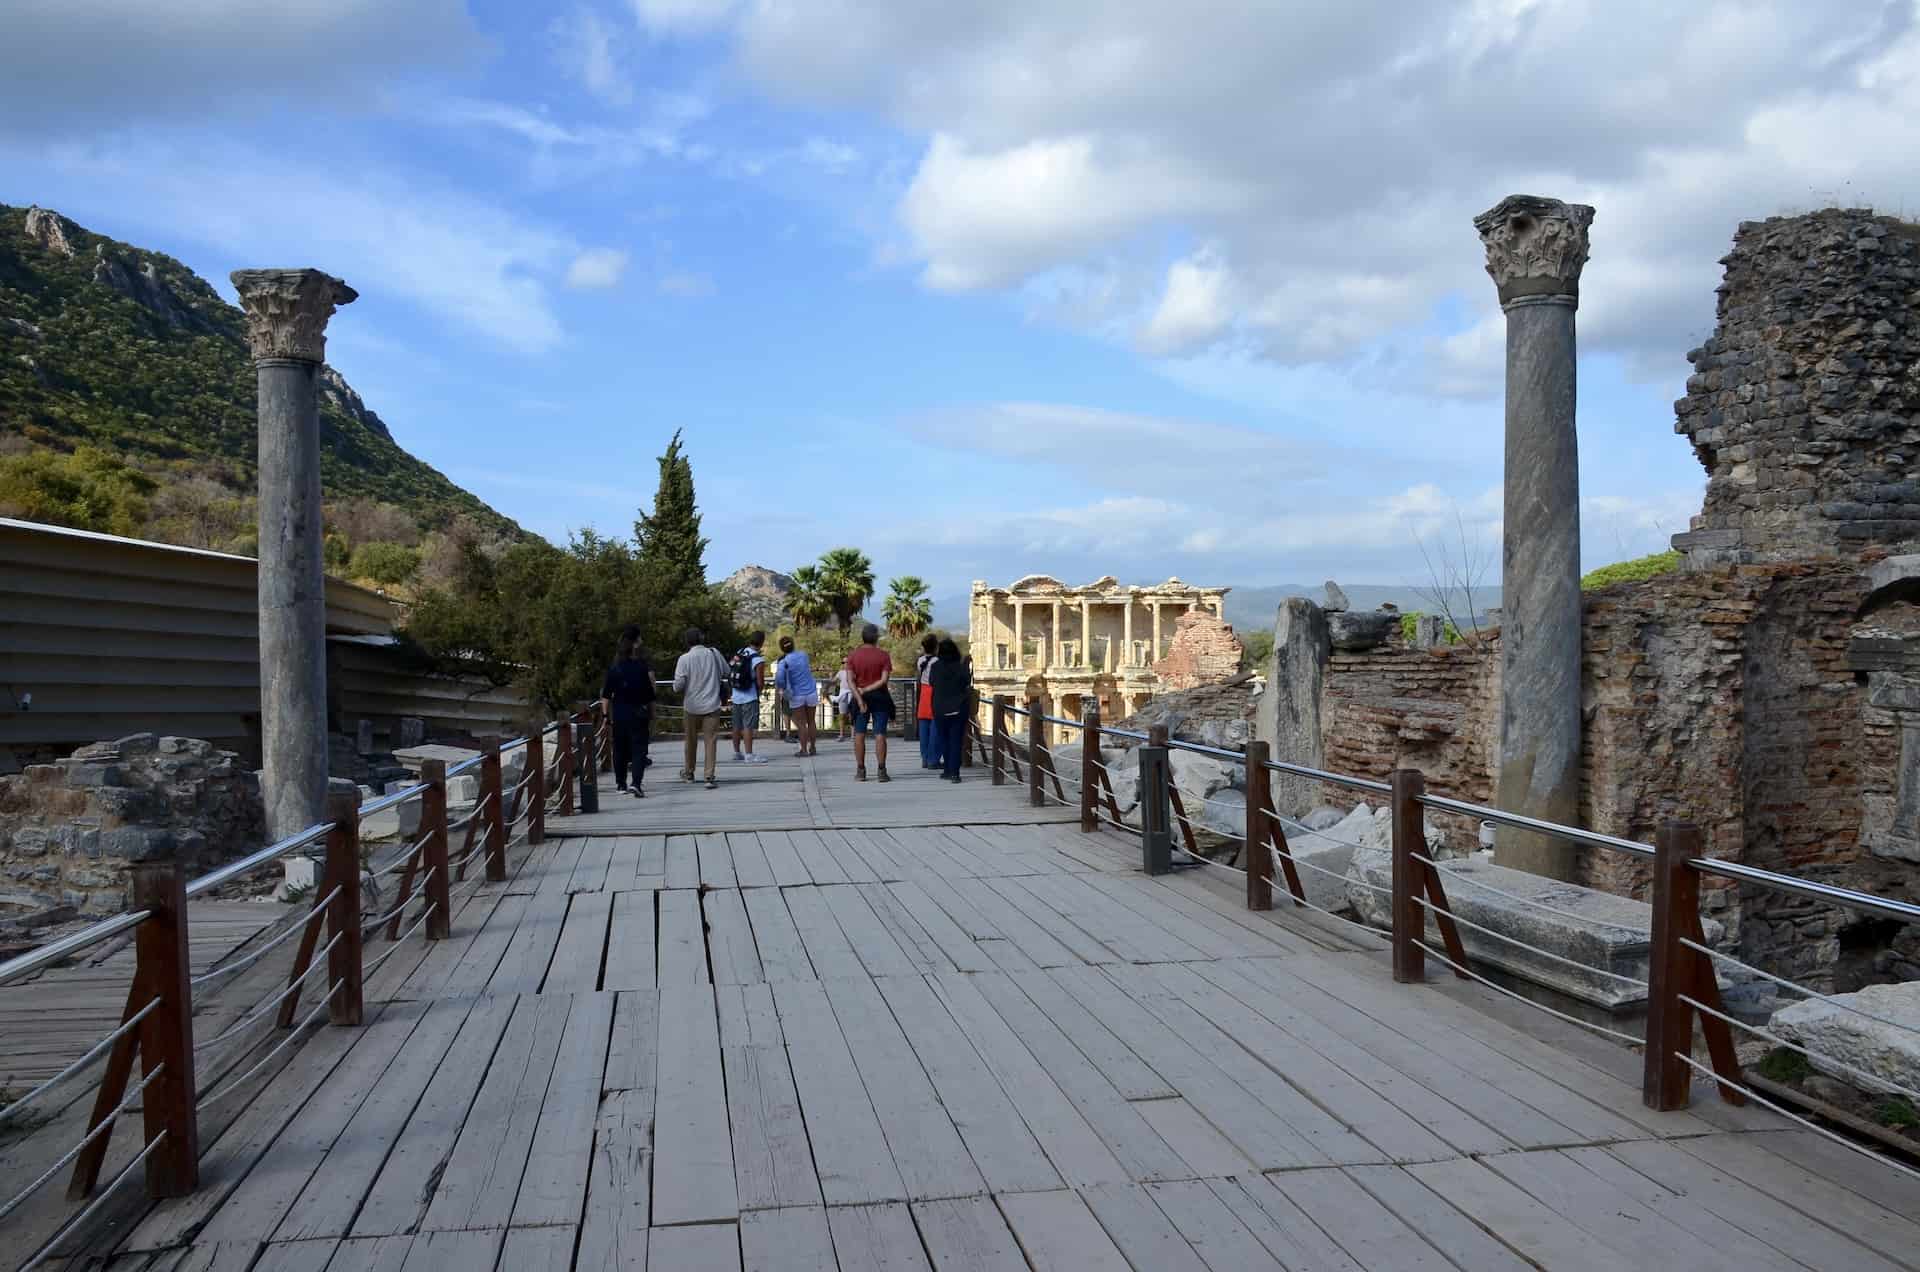 Wooden walkway at the Scholasticia Baths